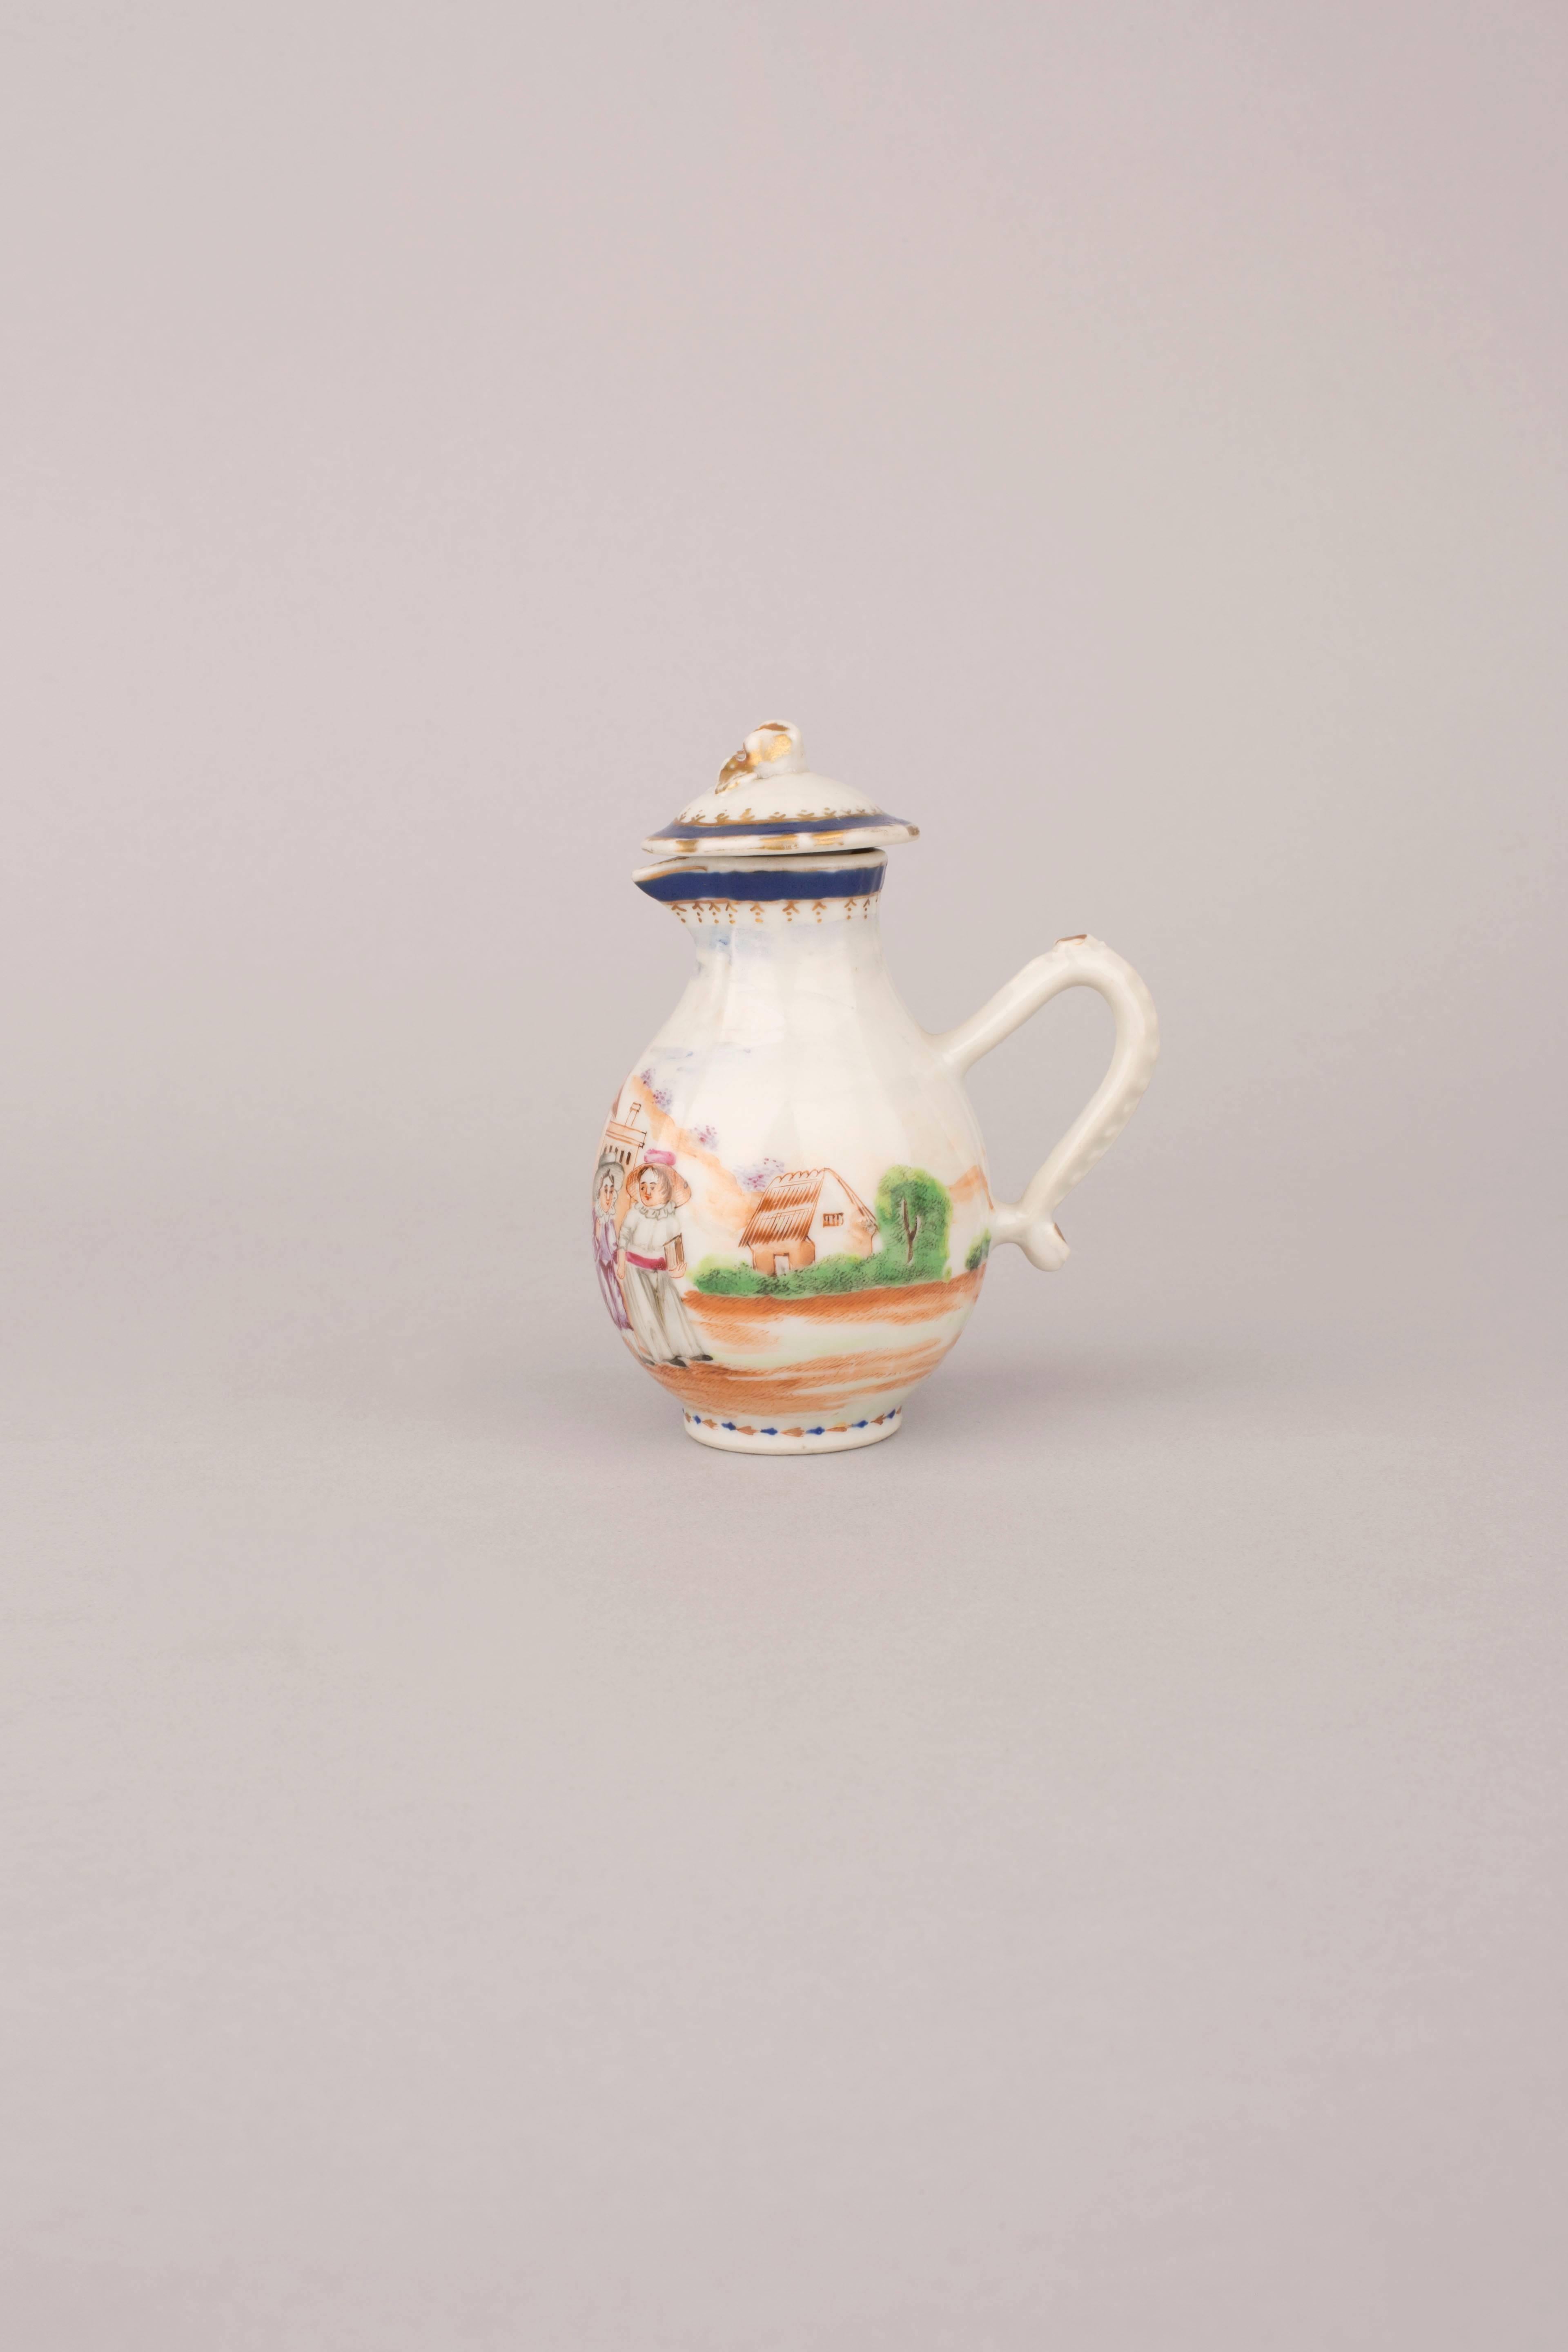 Qing Chinese Export Porcelain Famille Rose Jug and Cover, 18th Century